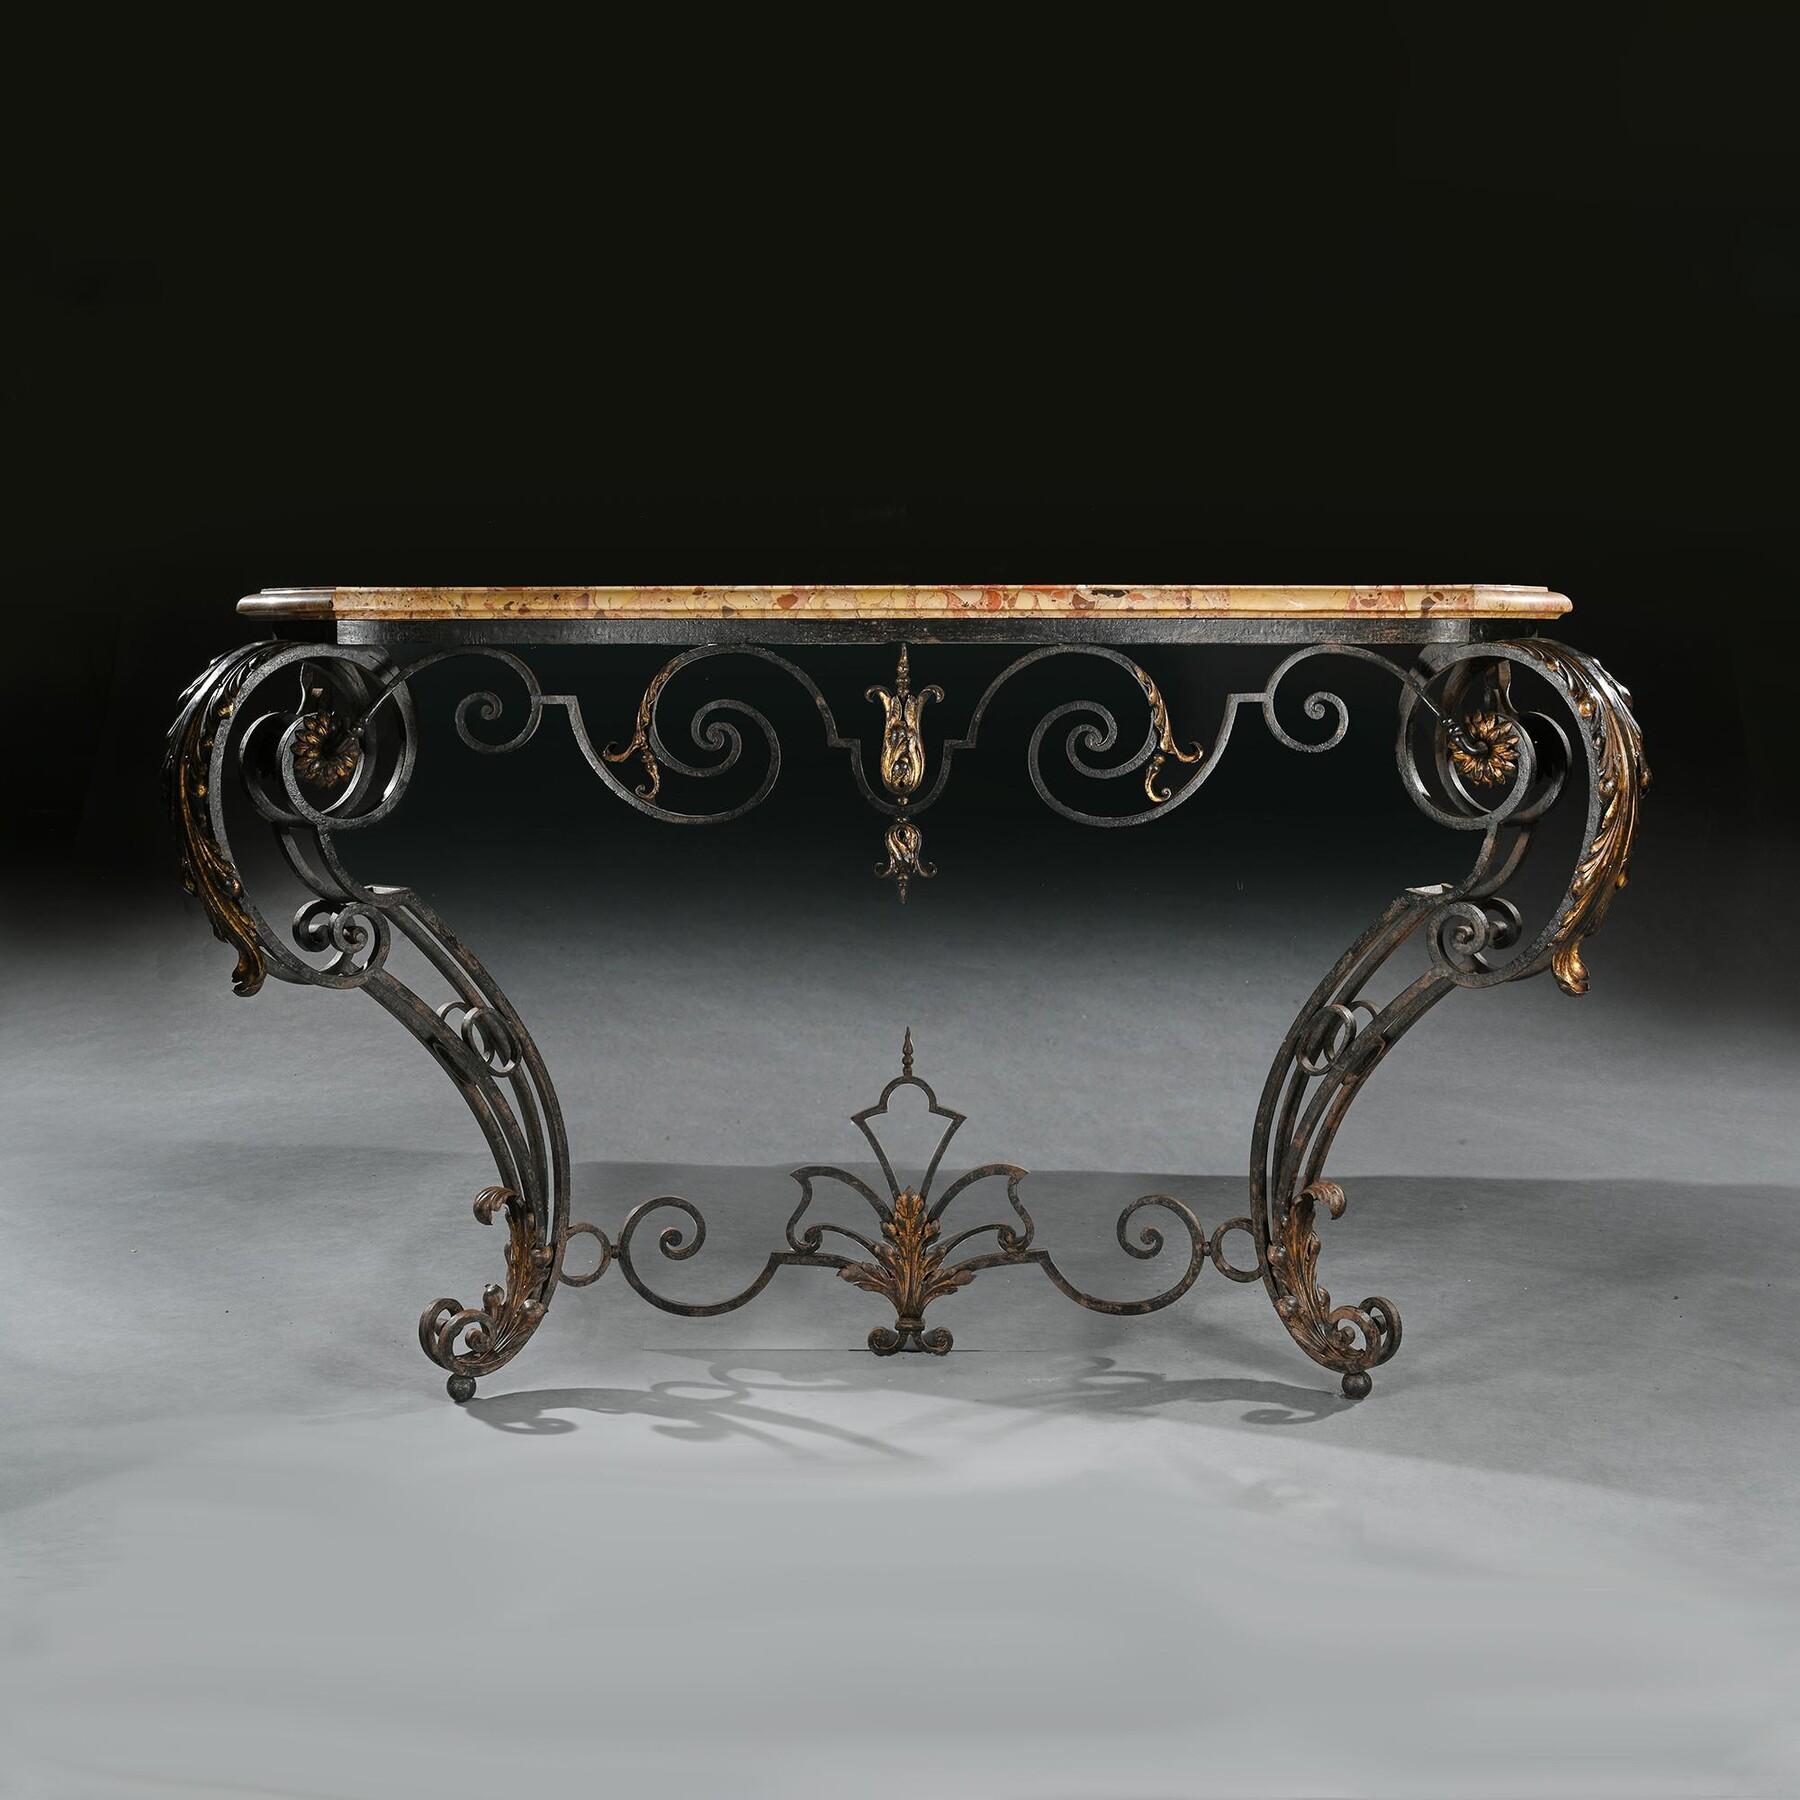 An Extremely Attractive and Imposing French Wrought Iron and Parcel Gilt Console Table With Original Brèche d’Alep Marble Top

French circa 1880

Of grand scale, this console table is of particularly well-proportioned slim form, the body of the